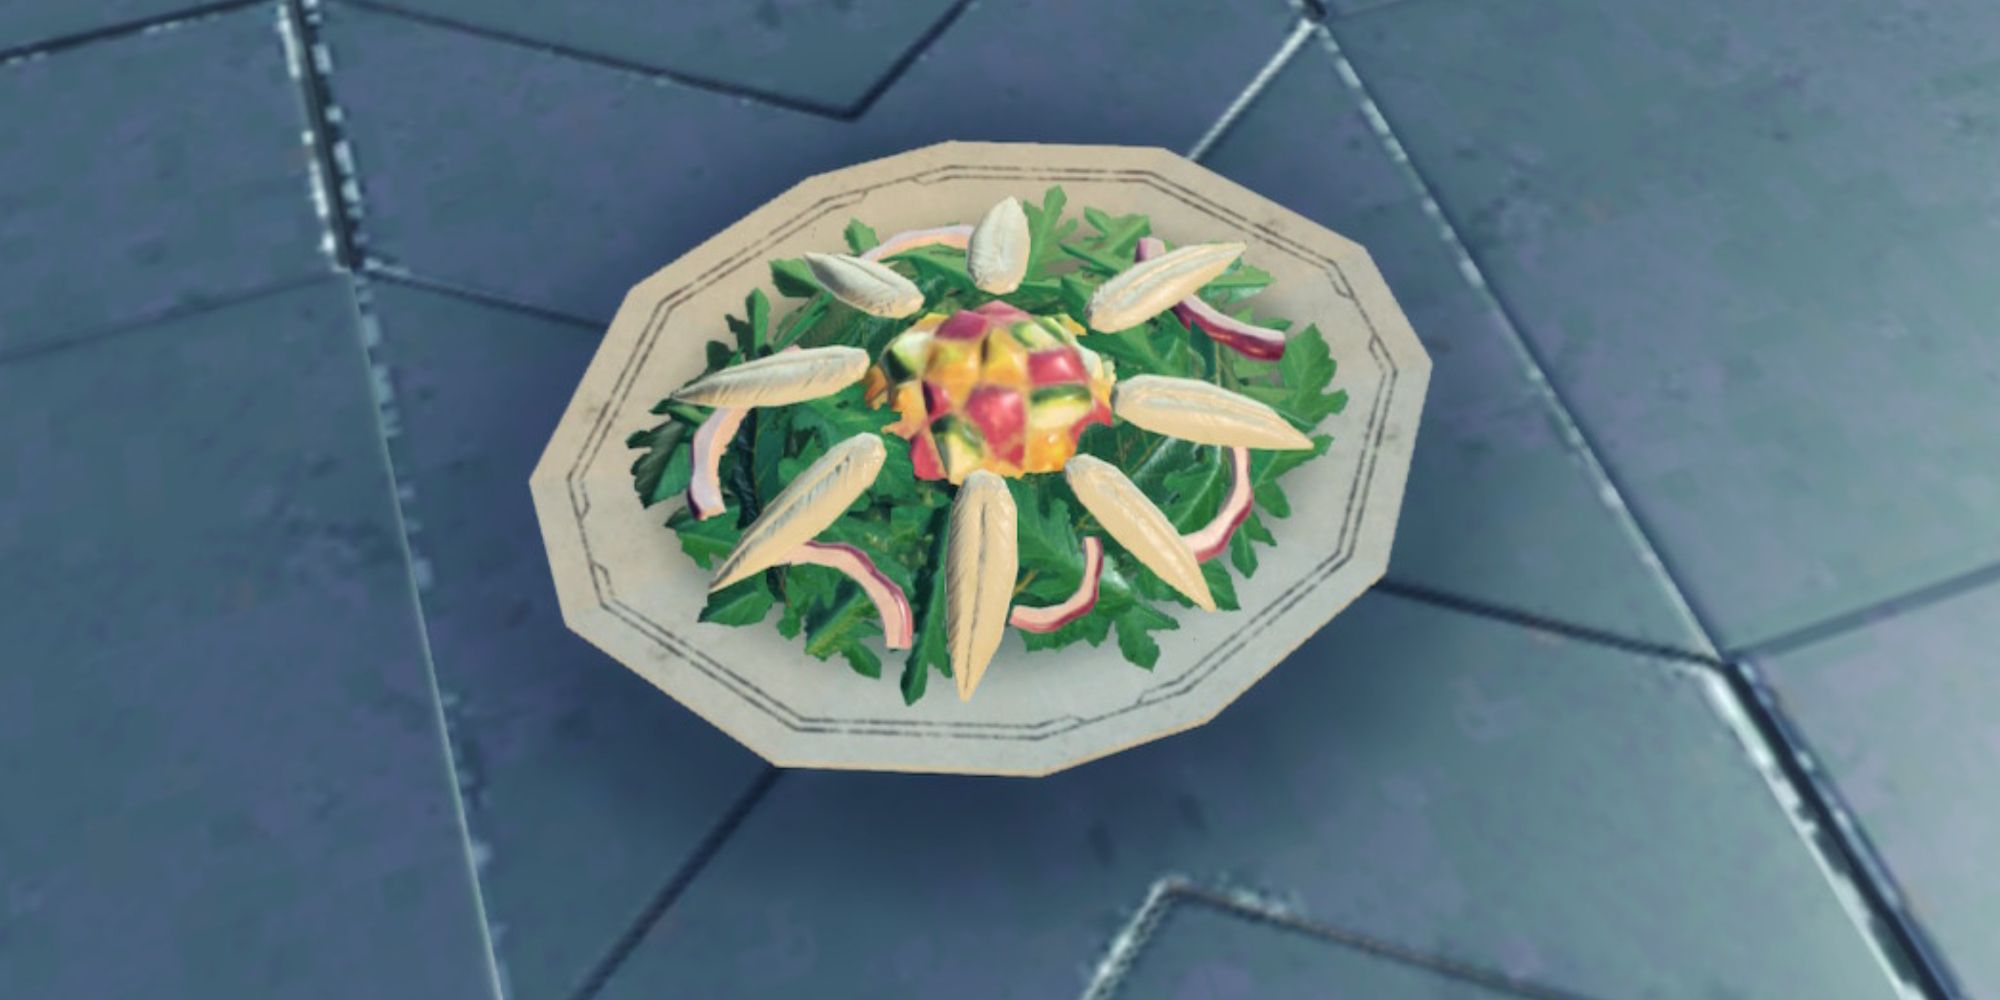 Well-Dressed Maktha Salad Meal in Xenoblade Chronicles 3